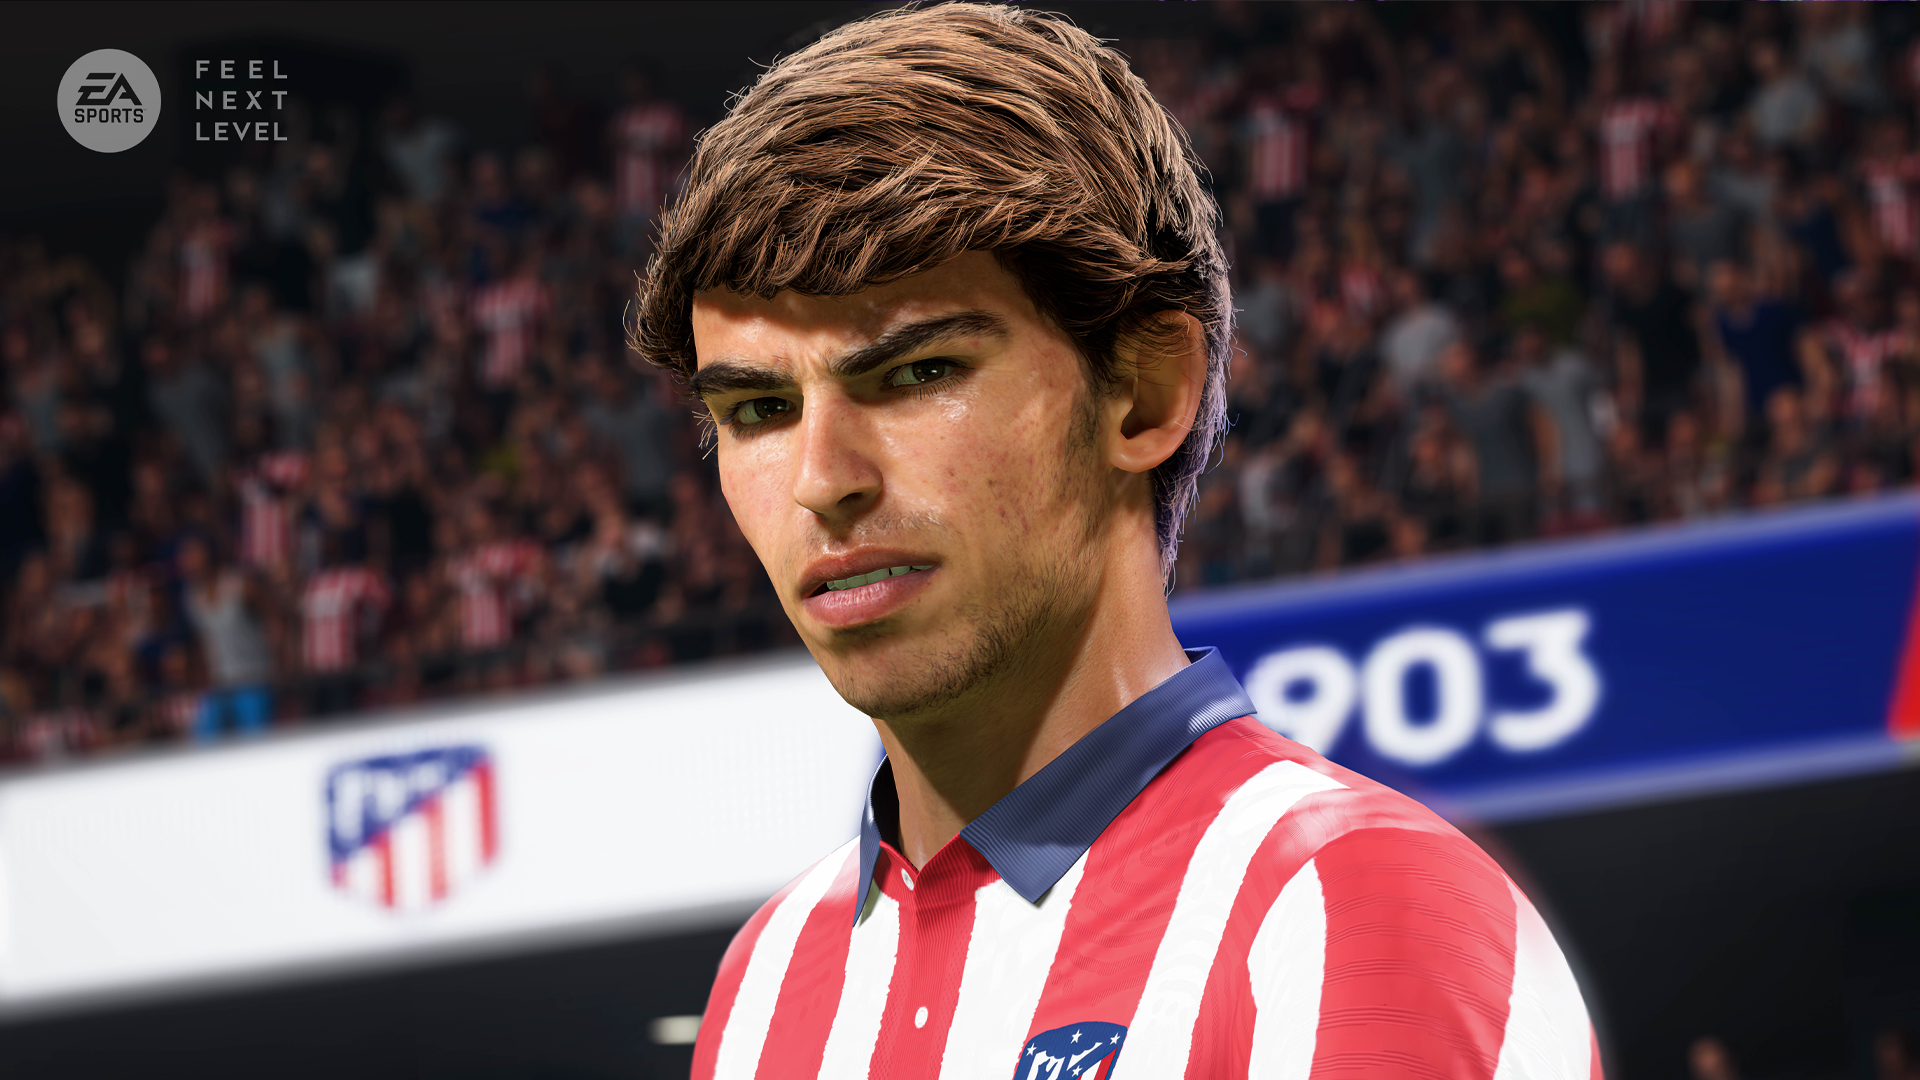 An Atletico Madrid player